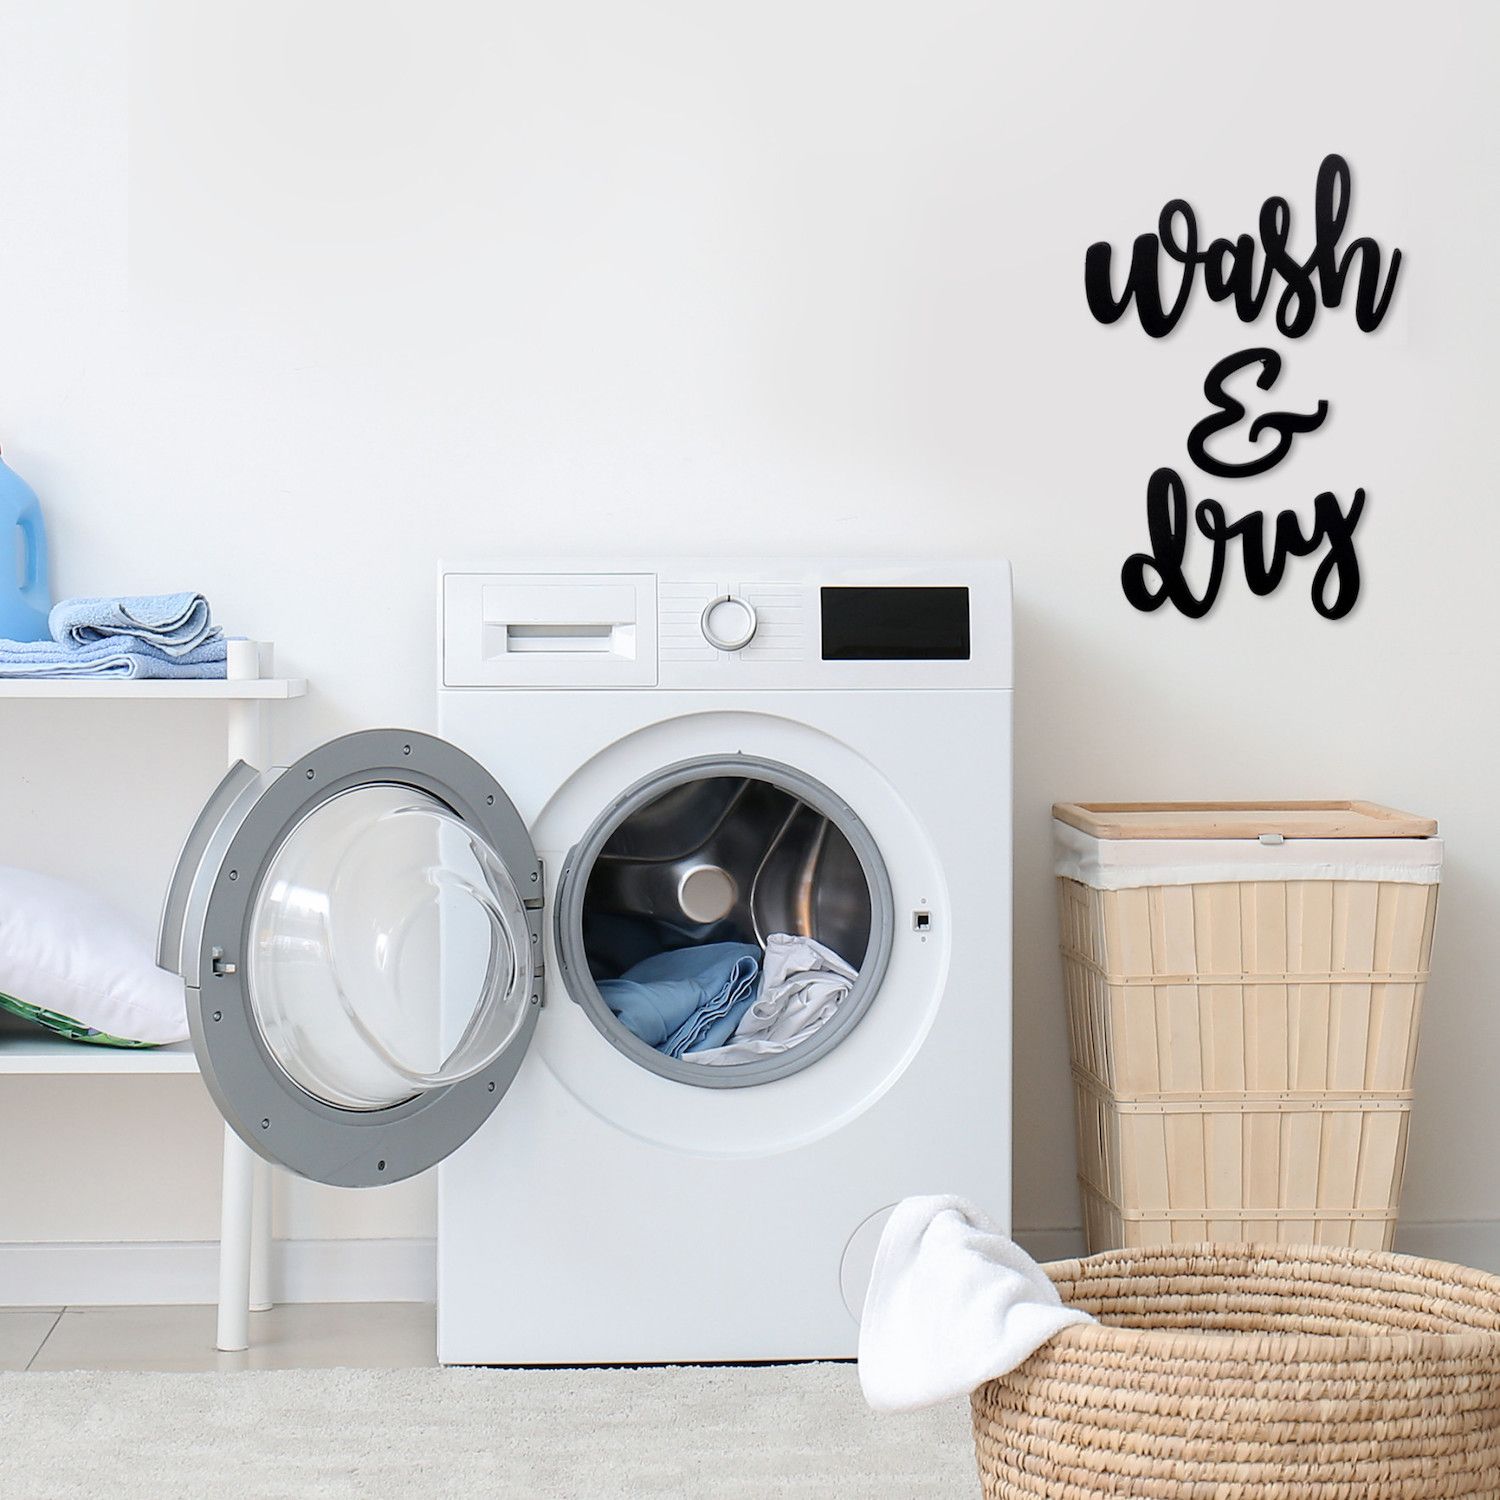 Easily enhance the look of the walls in your laundry room with peel-and-stick wall decals.